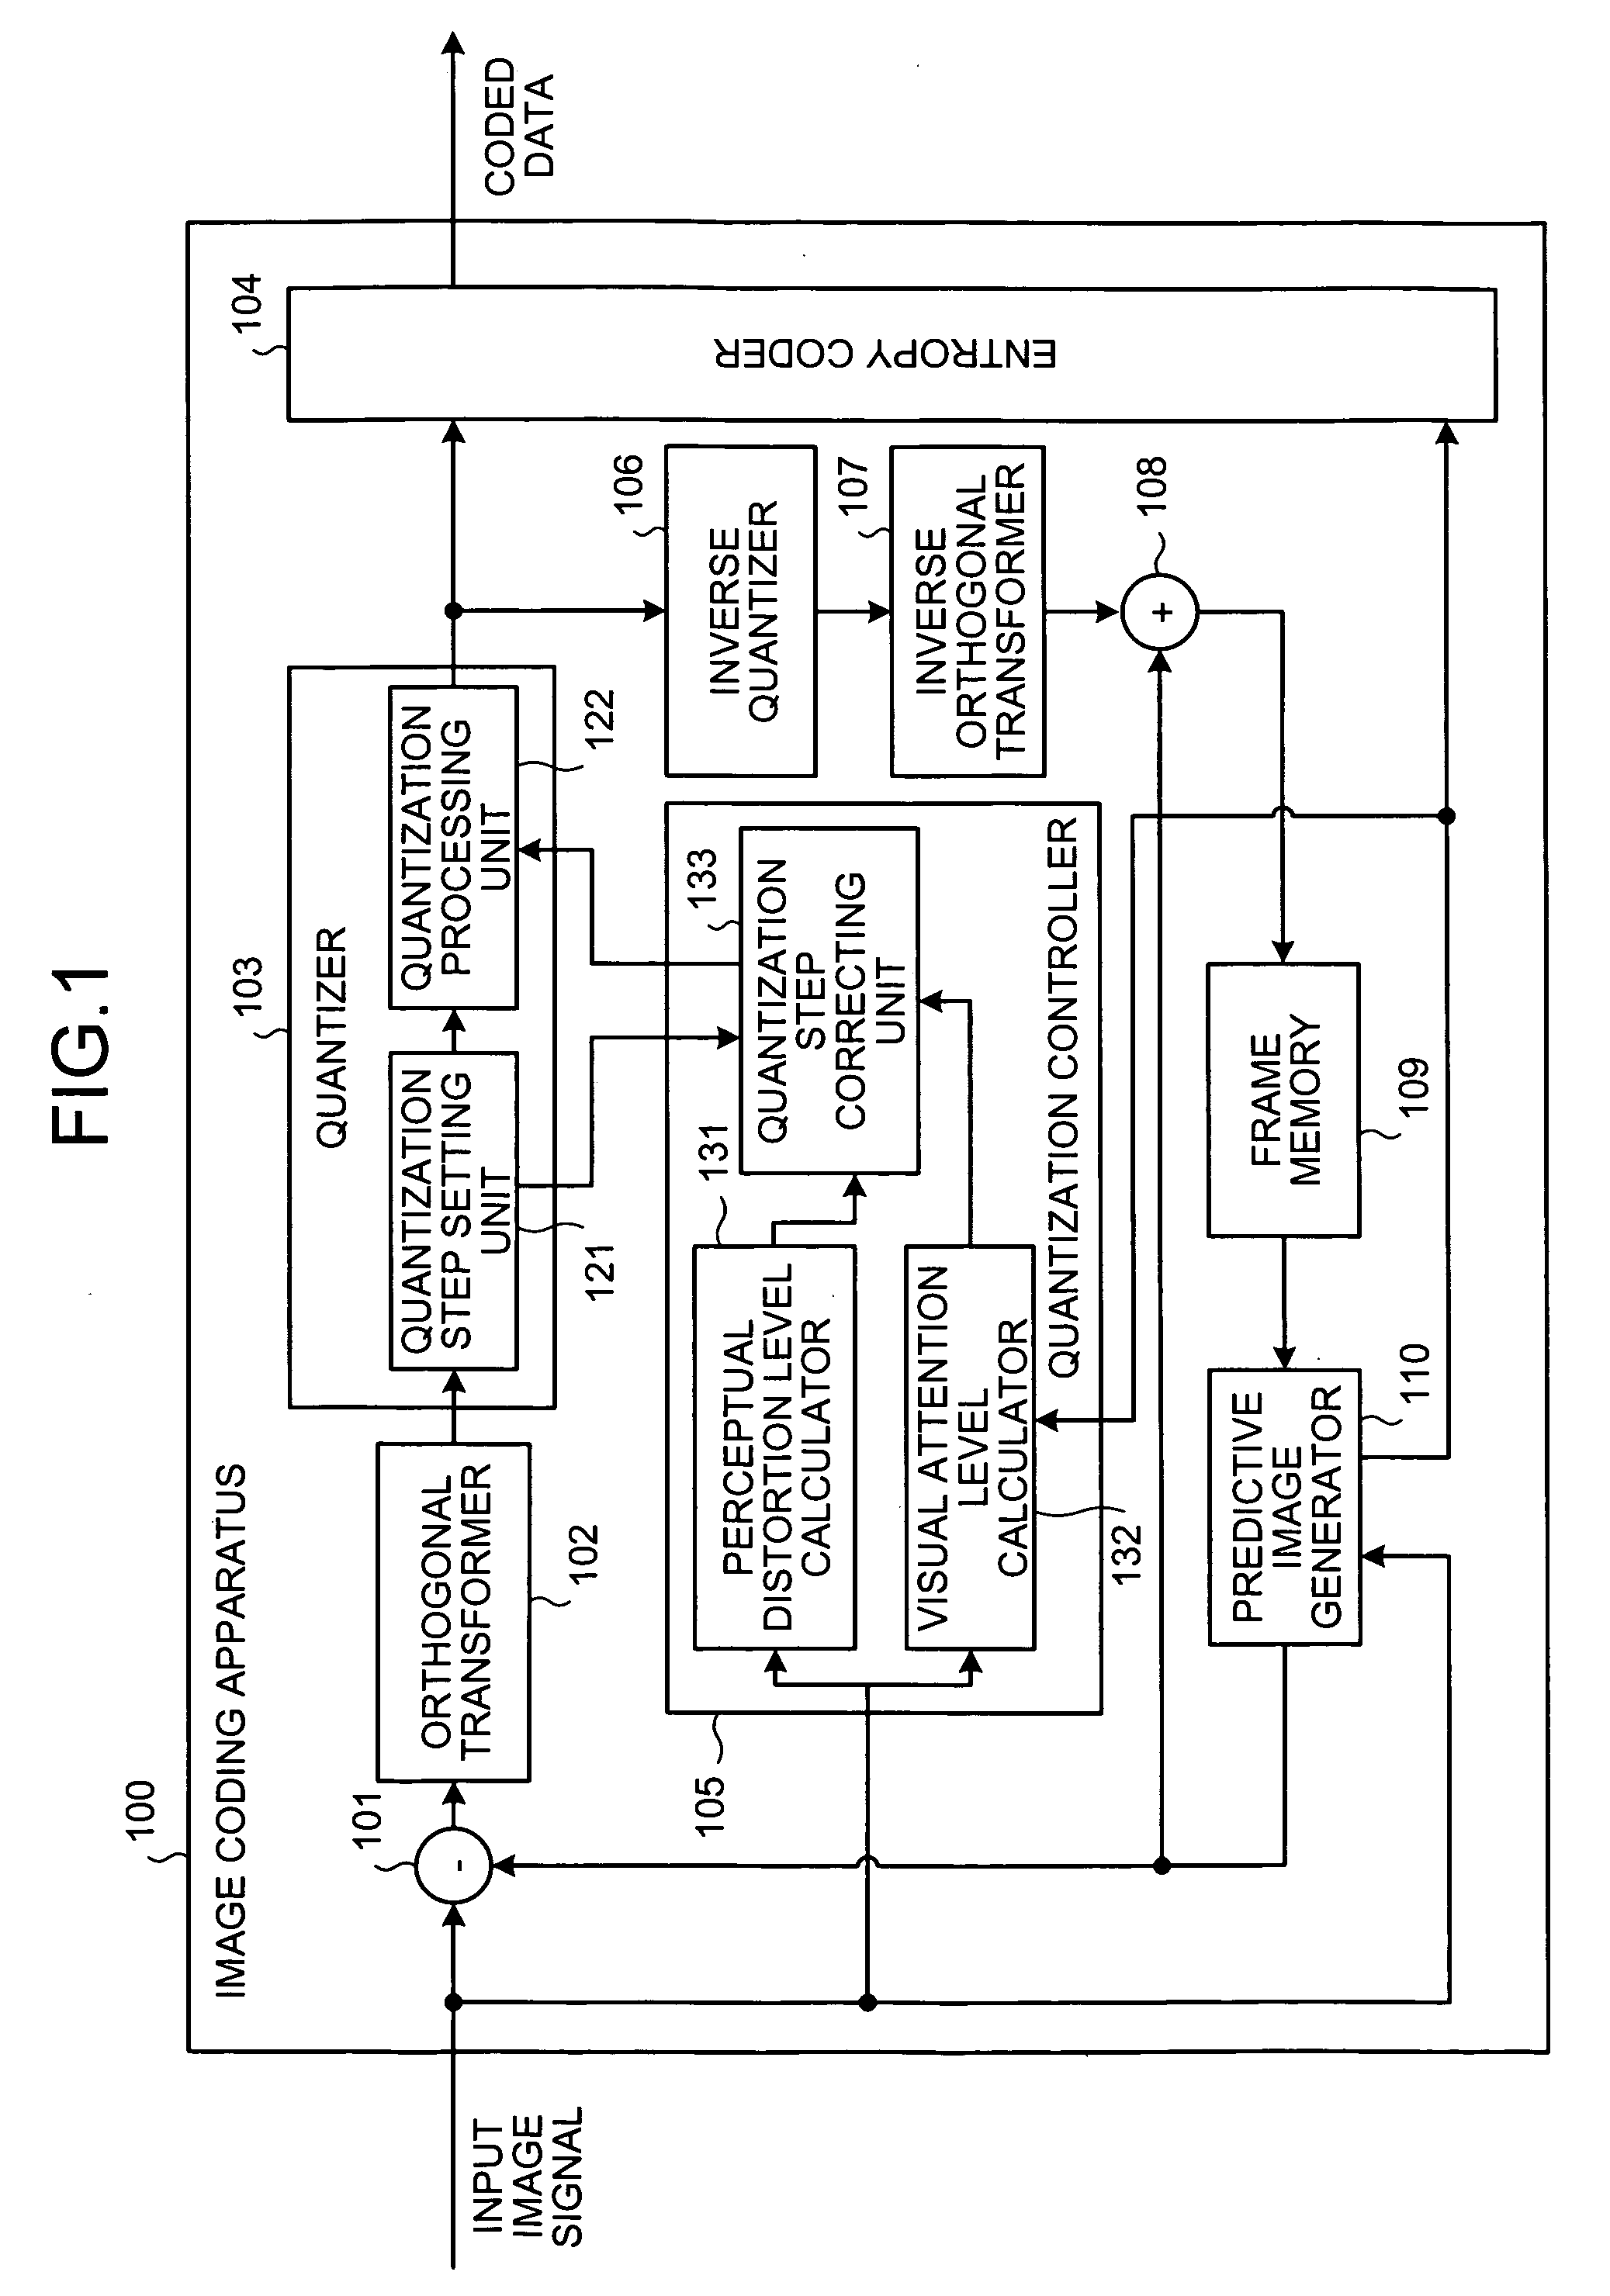 Apparatus and method for coding image based on level of visual attention and level of perceivable image quality distortion, and computer program product therefor